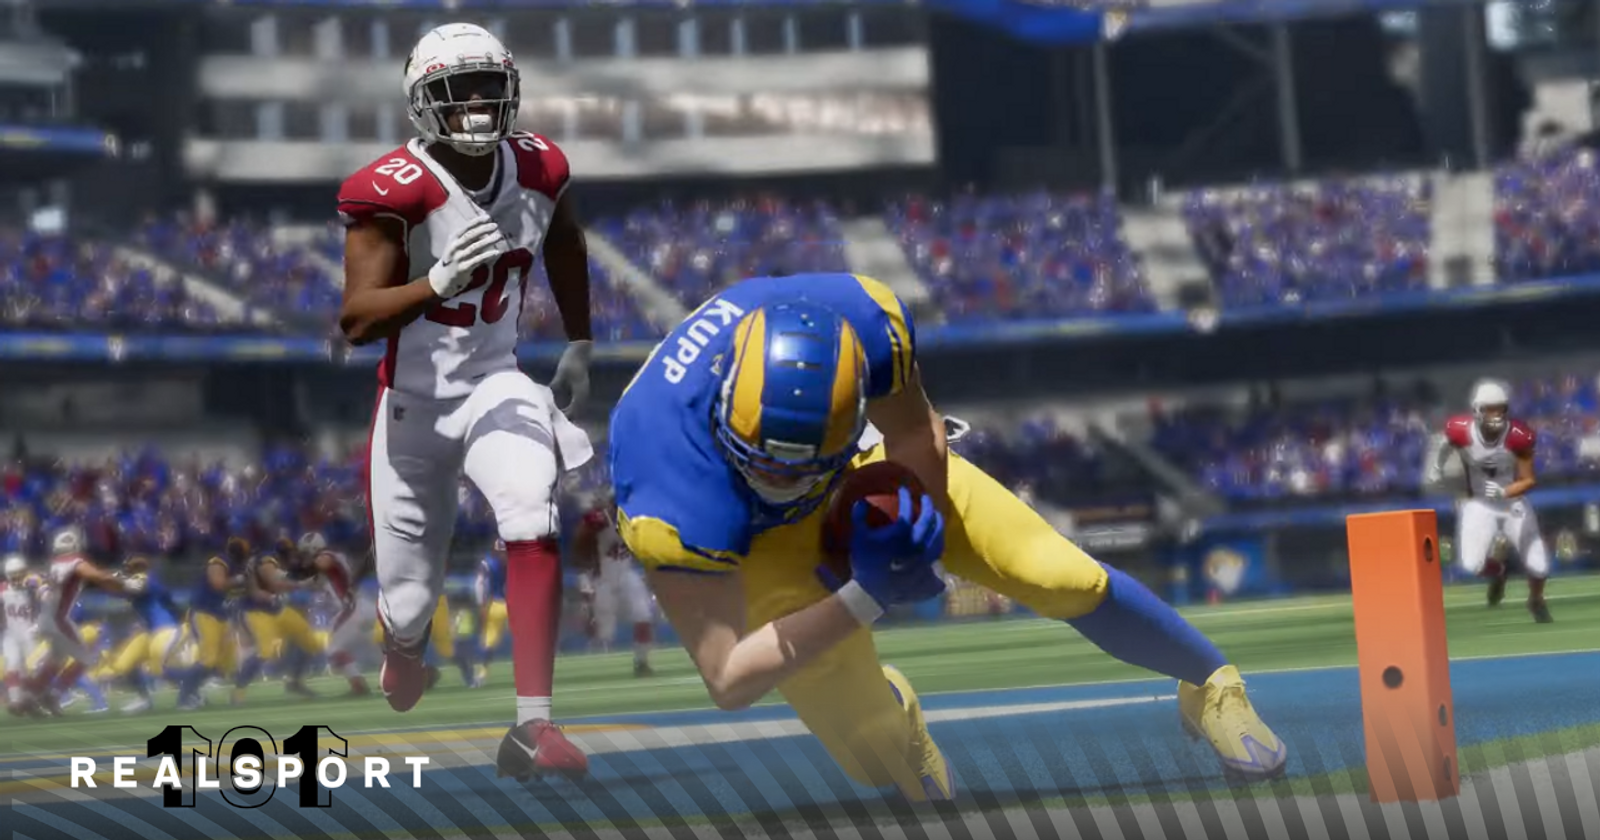 Madden NFL 23 Franchise Mode Details - Scouting, Free Agency, More